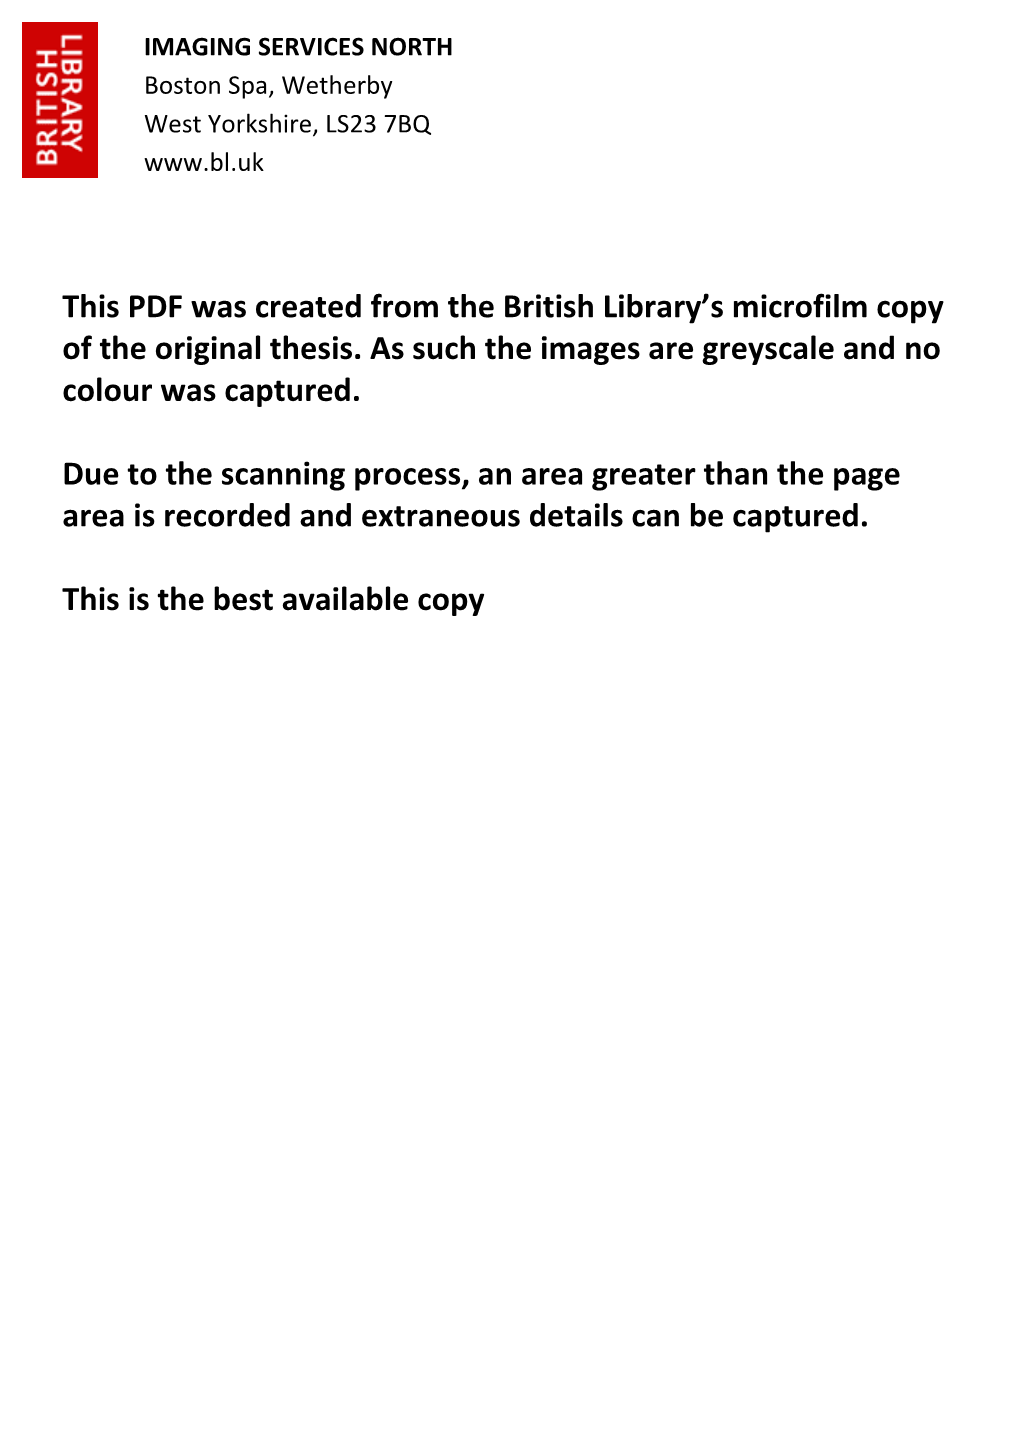 This PDF Was Created from the British Library's